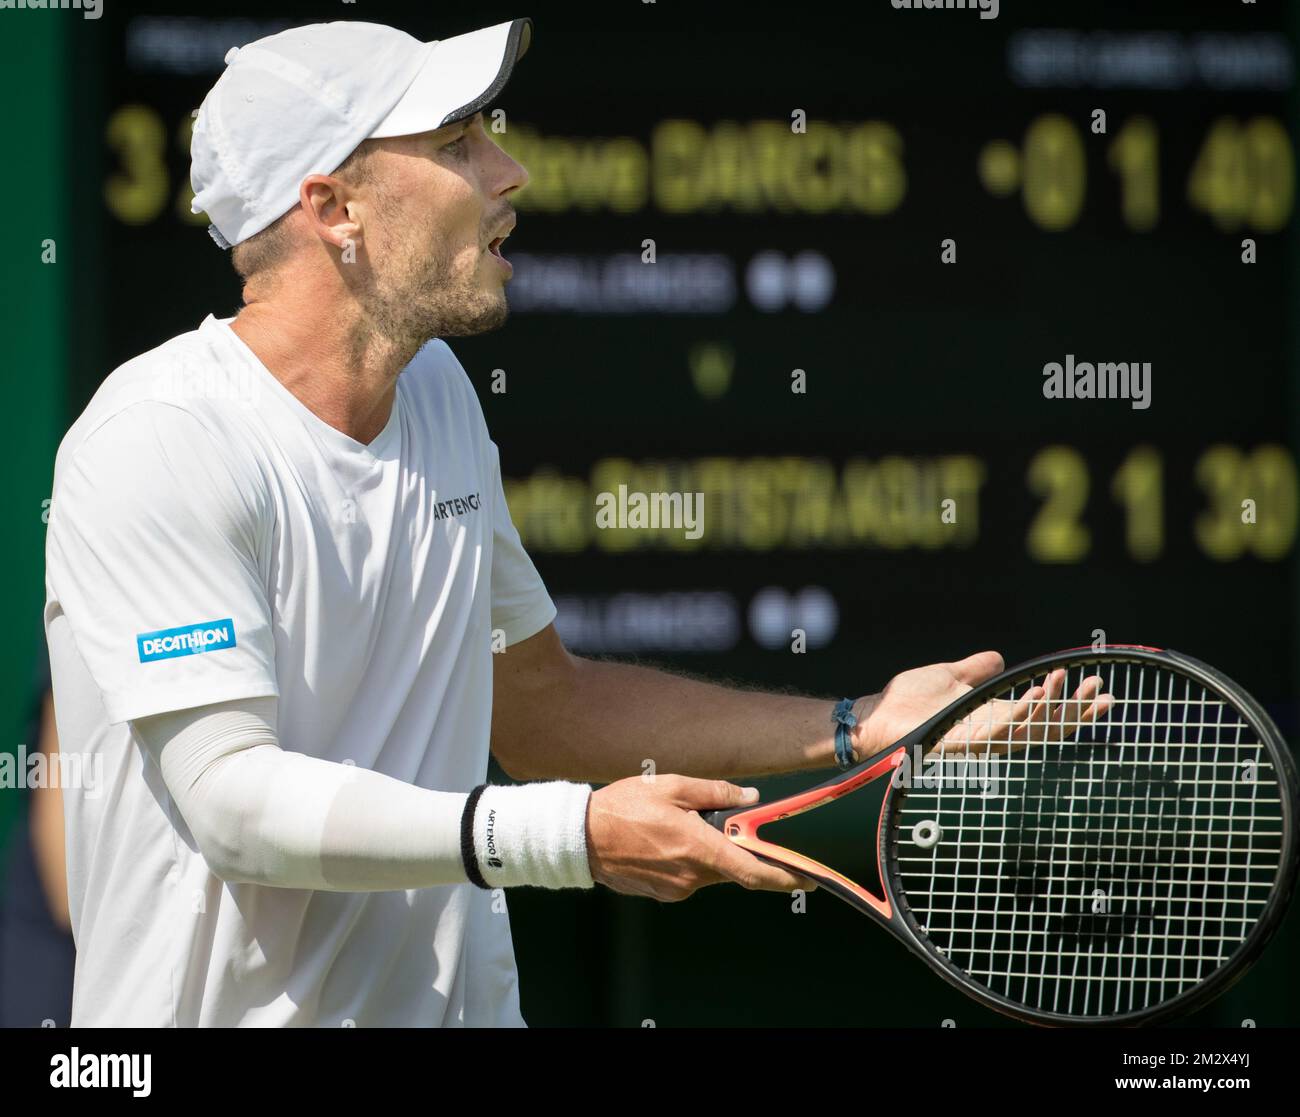 Belgian Steve Darcis (ATP 221) reacts during a tennis game against Spanish  Bautista Agut (ATP 22) in the men's singles second round at the 2019  Wimbledon grand slam tennis tournament at the